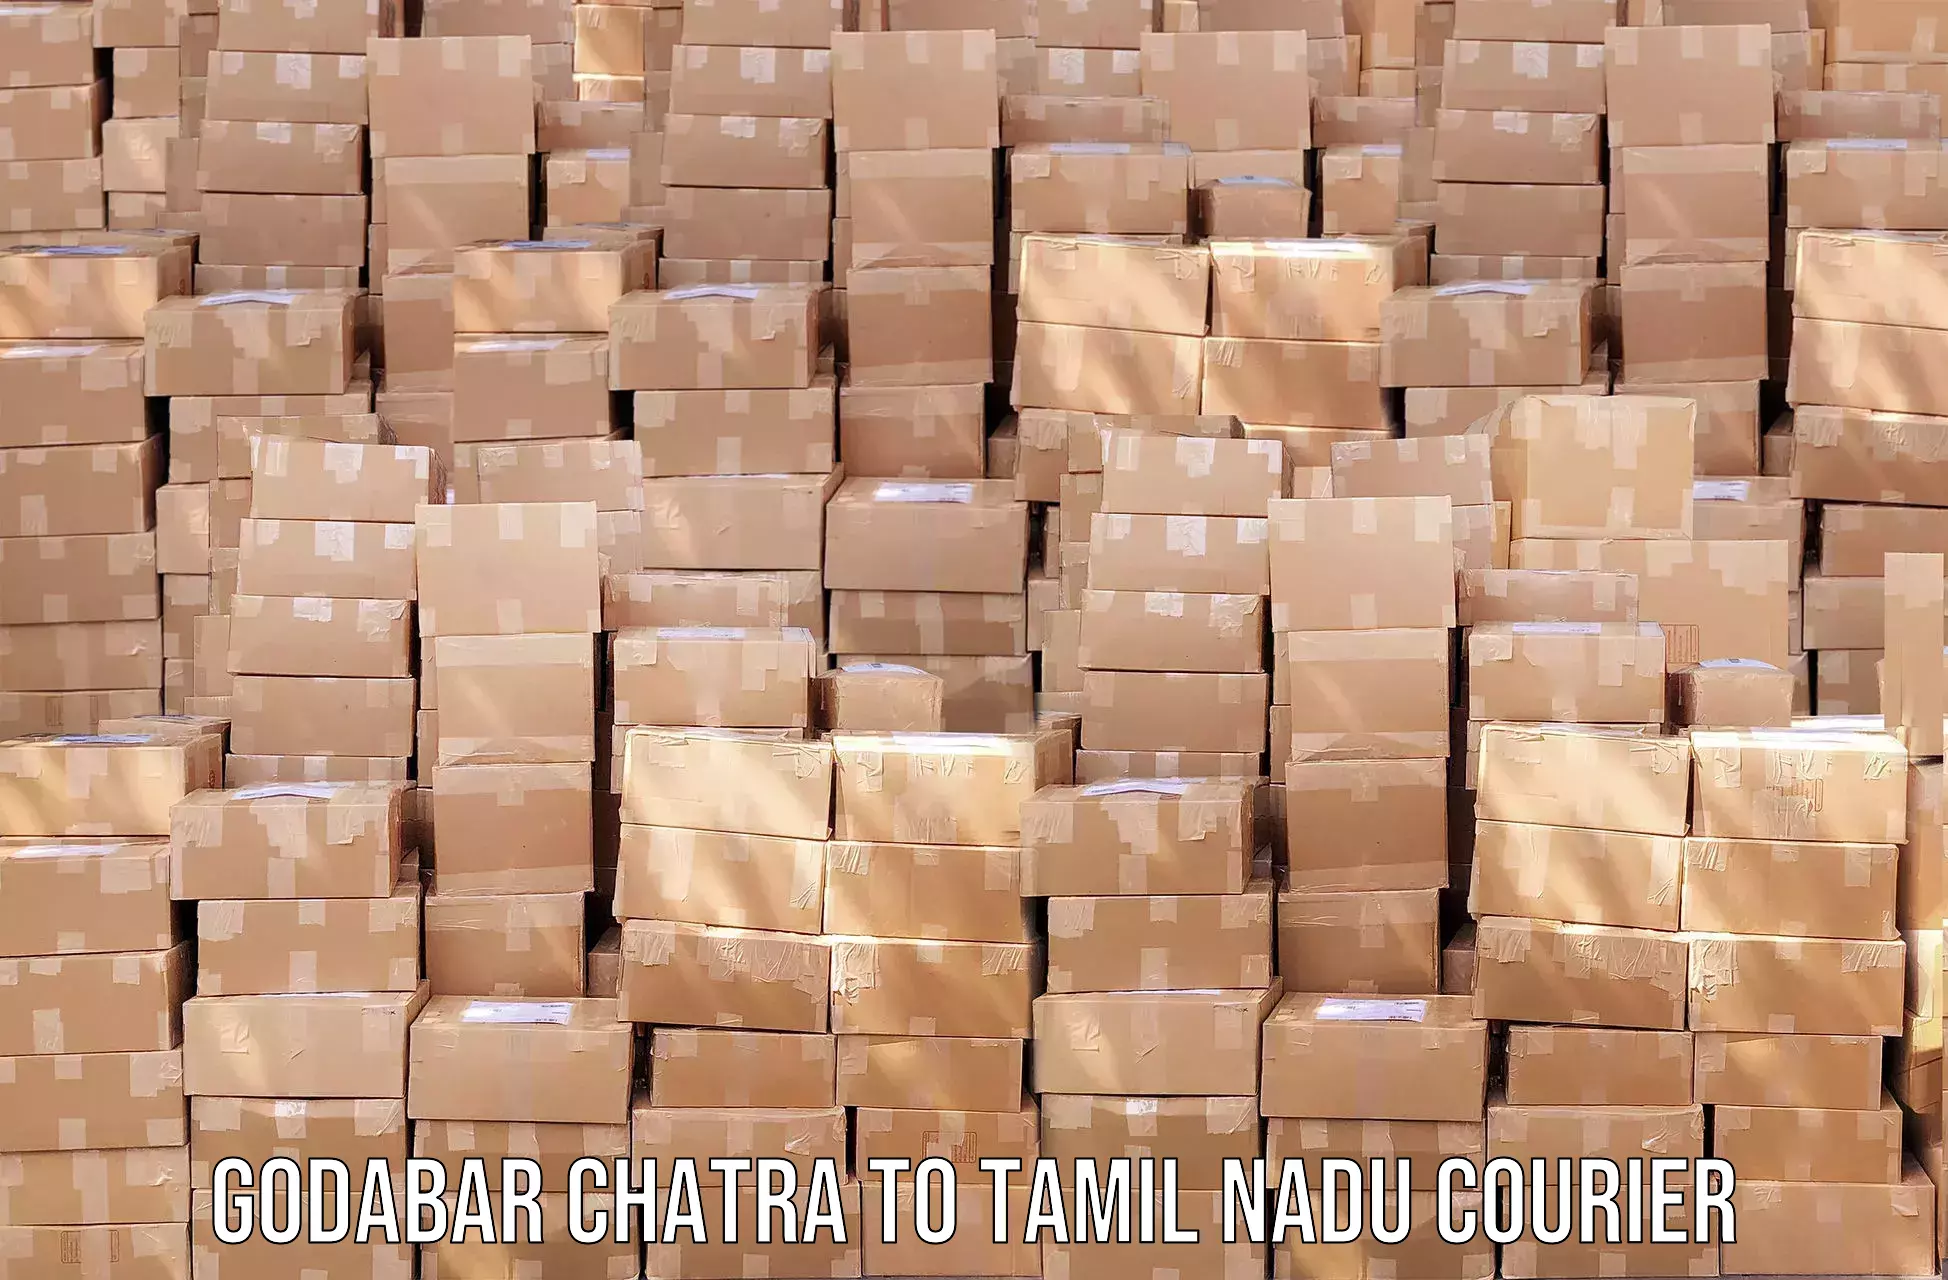 Small business couriers Godabar Chatra to Sivakasi